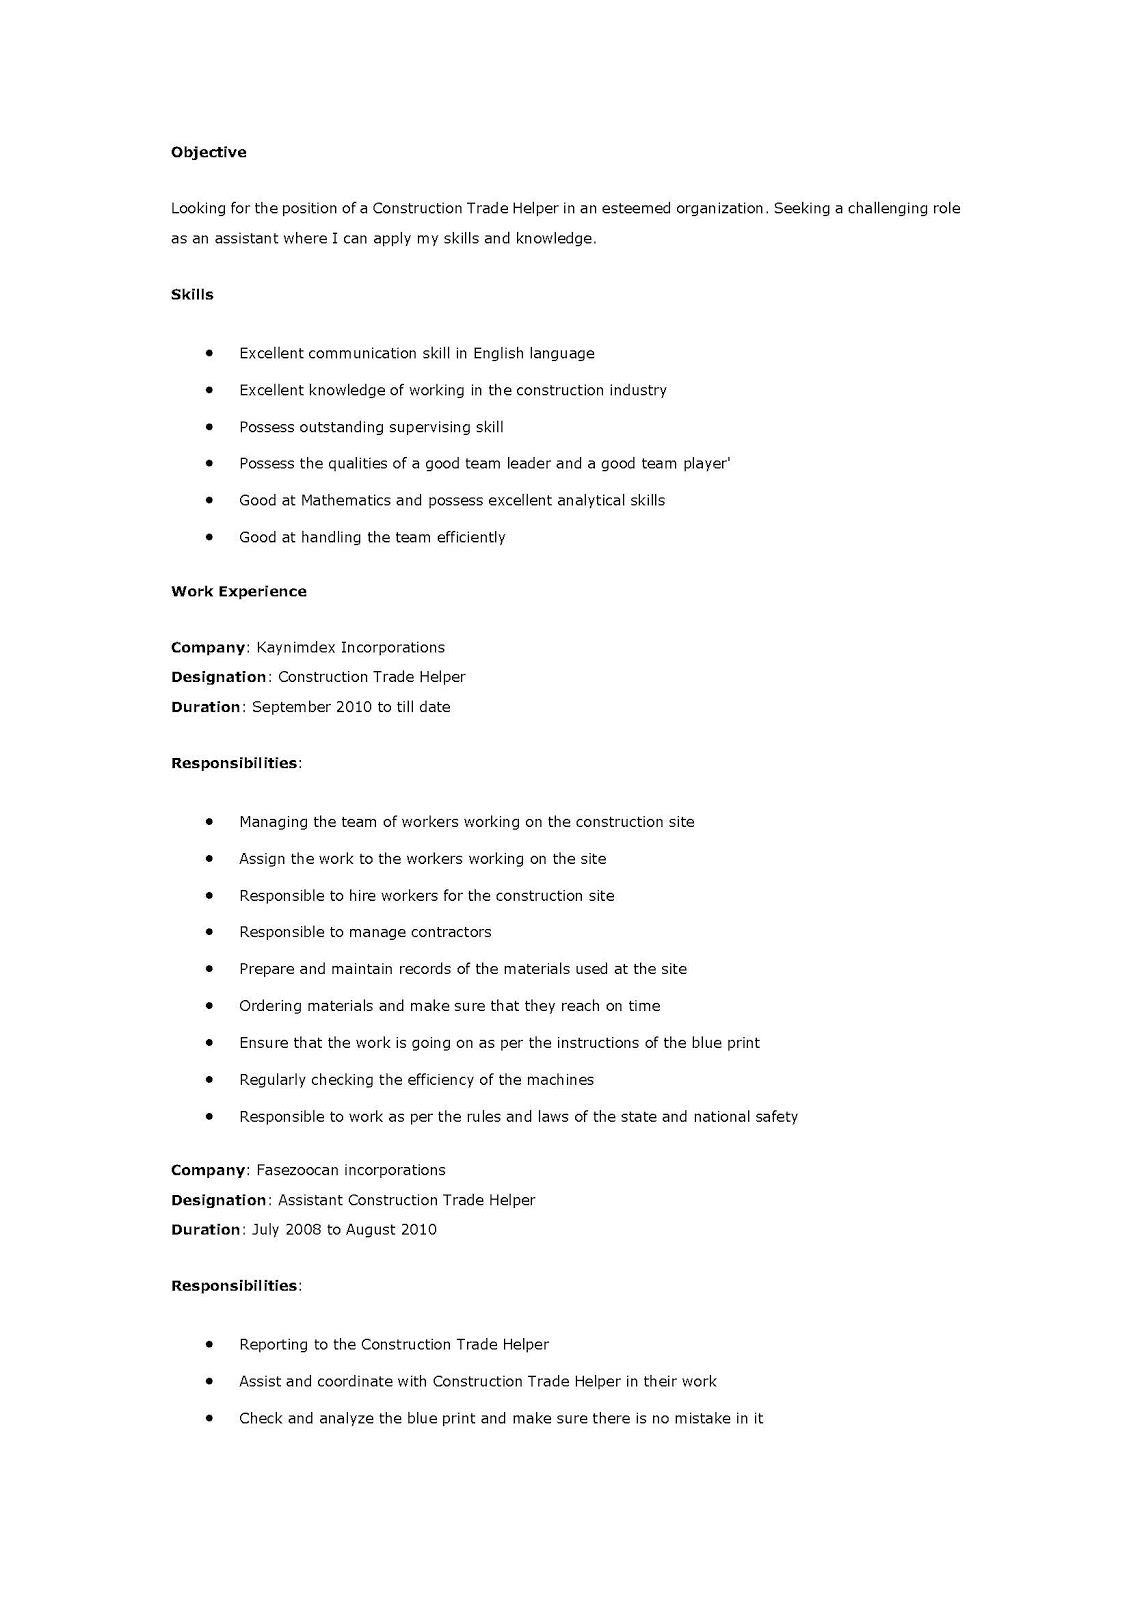 Where can i make and print a resume for free